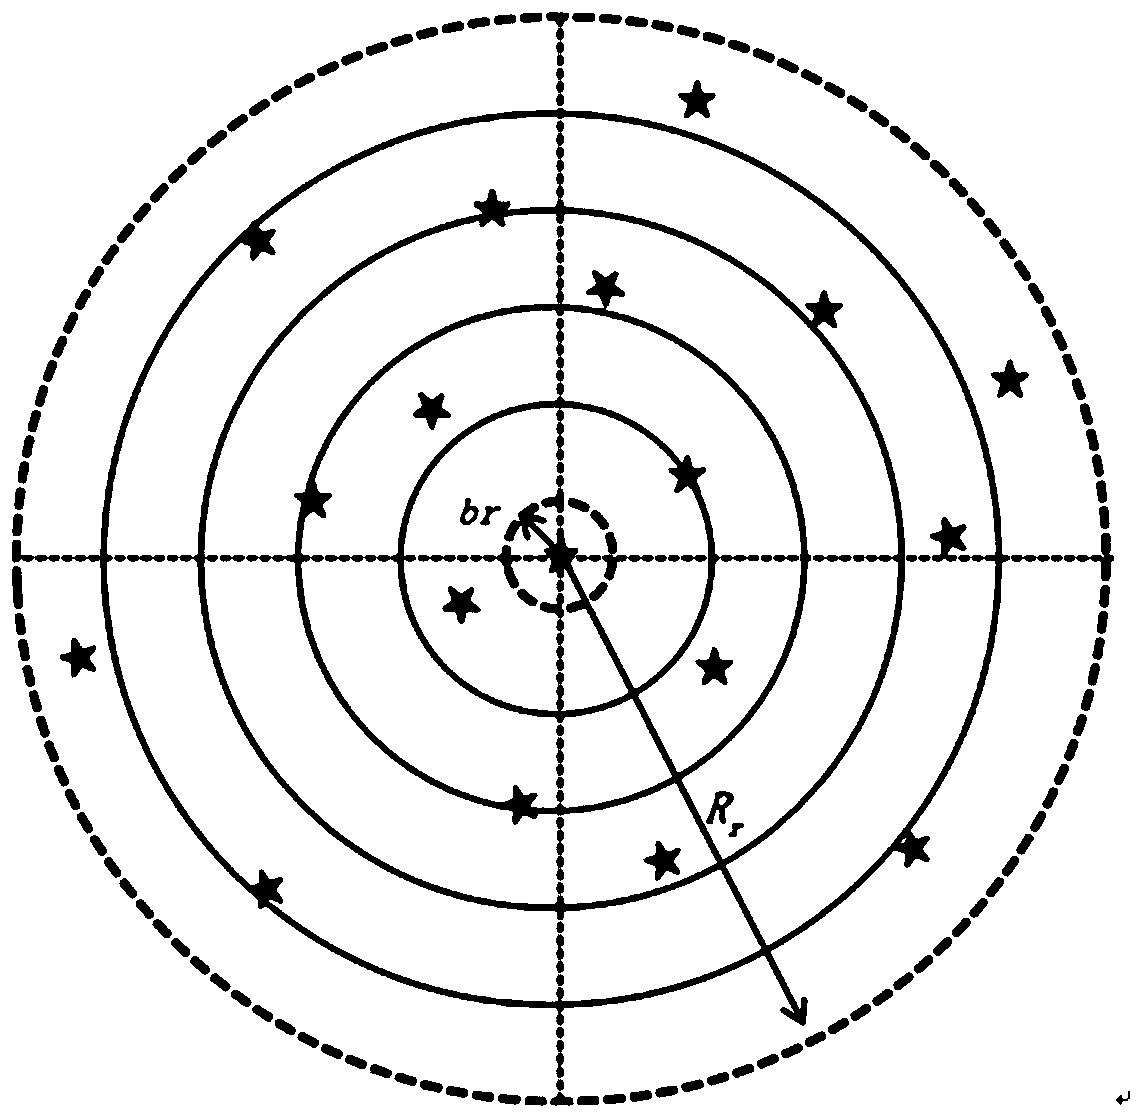 Star map identification method based on radial and dynamic circumferential modes